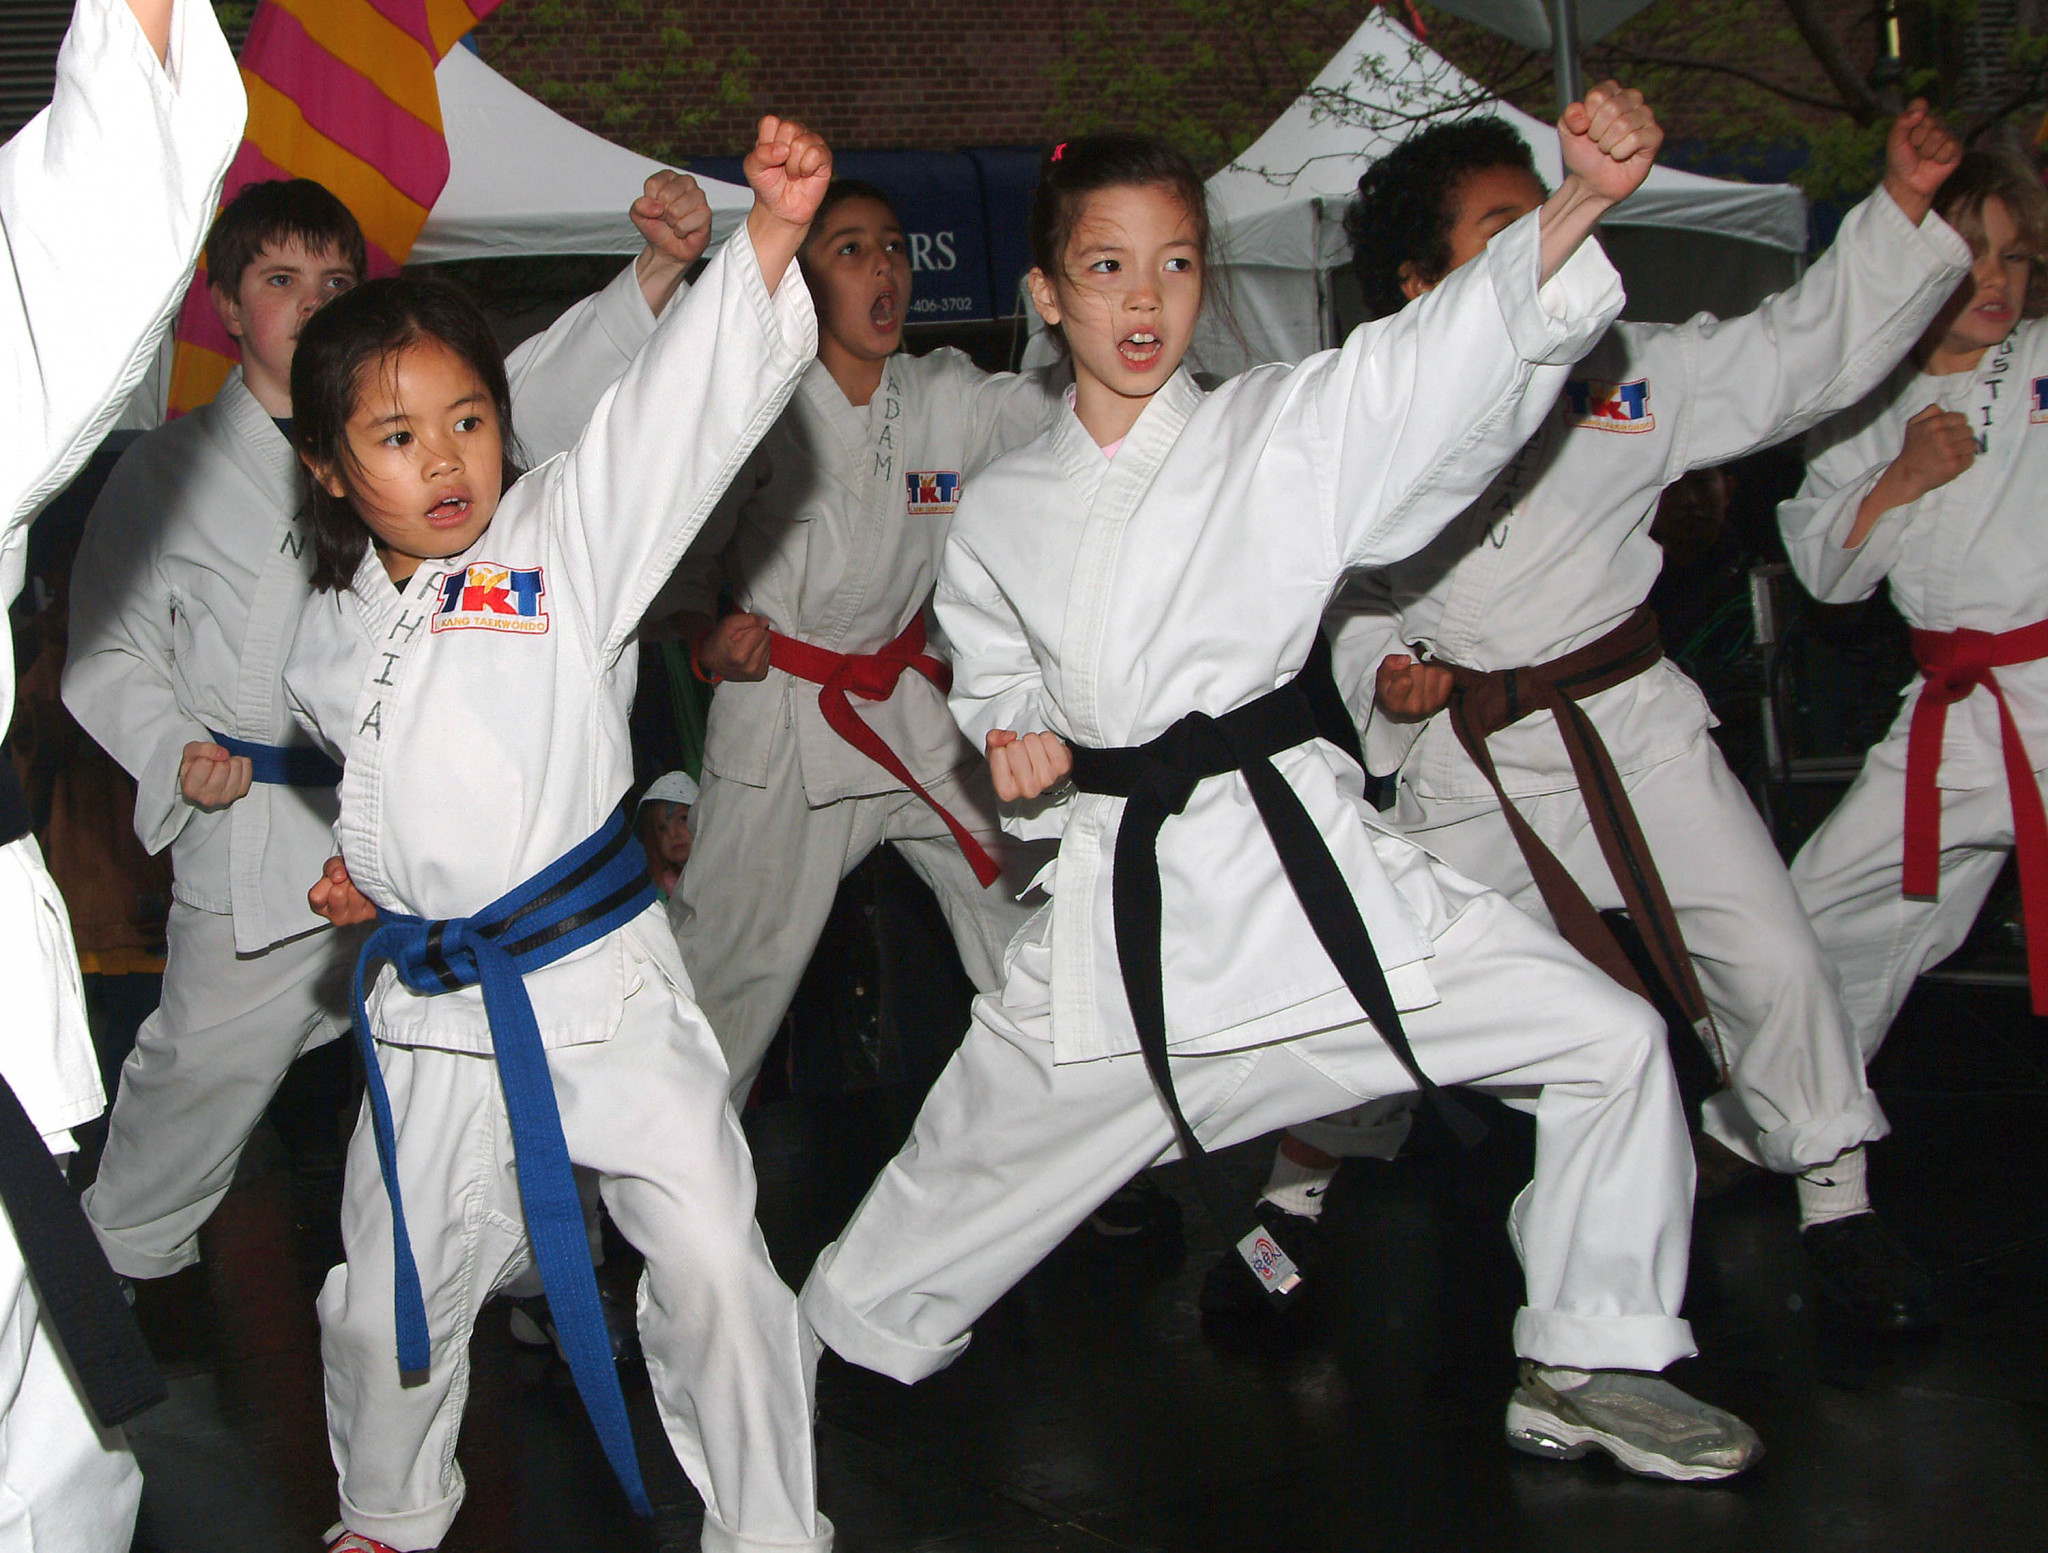 Children perform karate at the Family Festival Street Fair at the Tribeca Film Festival April 30, 2005 in New York City ©Getty Images